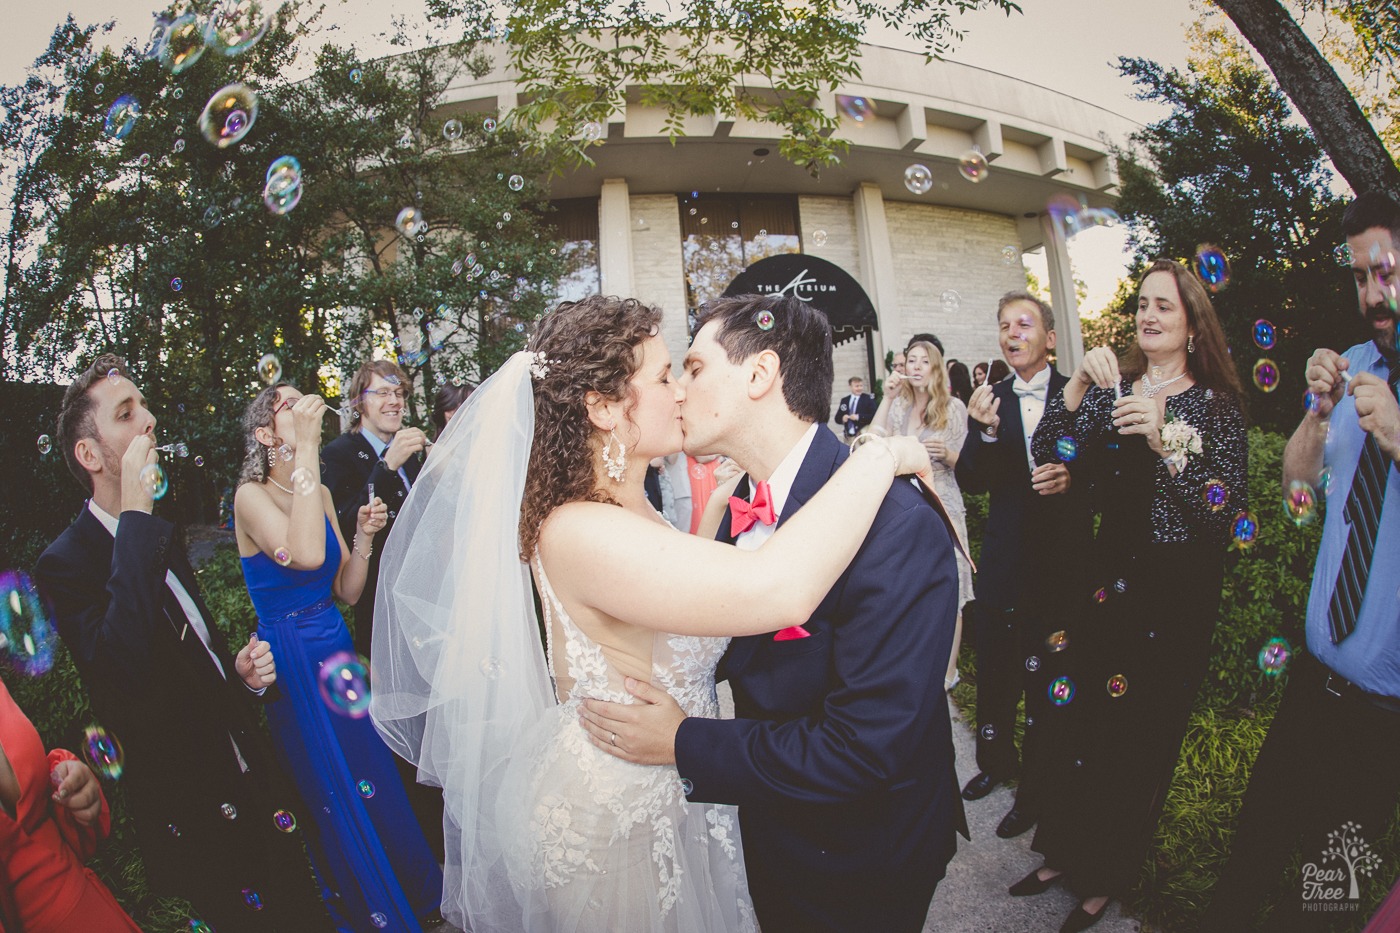 Atlanta wedding couple kisses in the middle of hundreds of bubbles at their exit outside of The Atrium